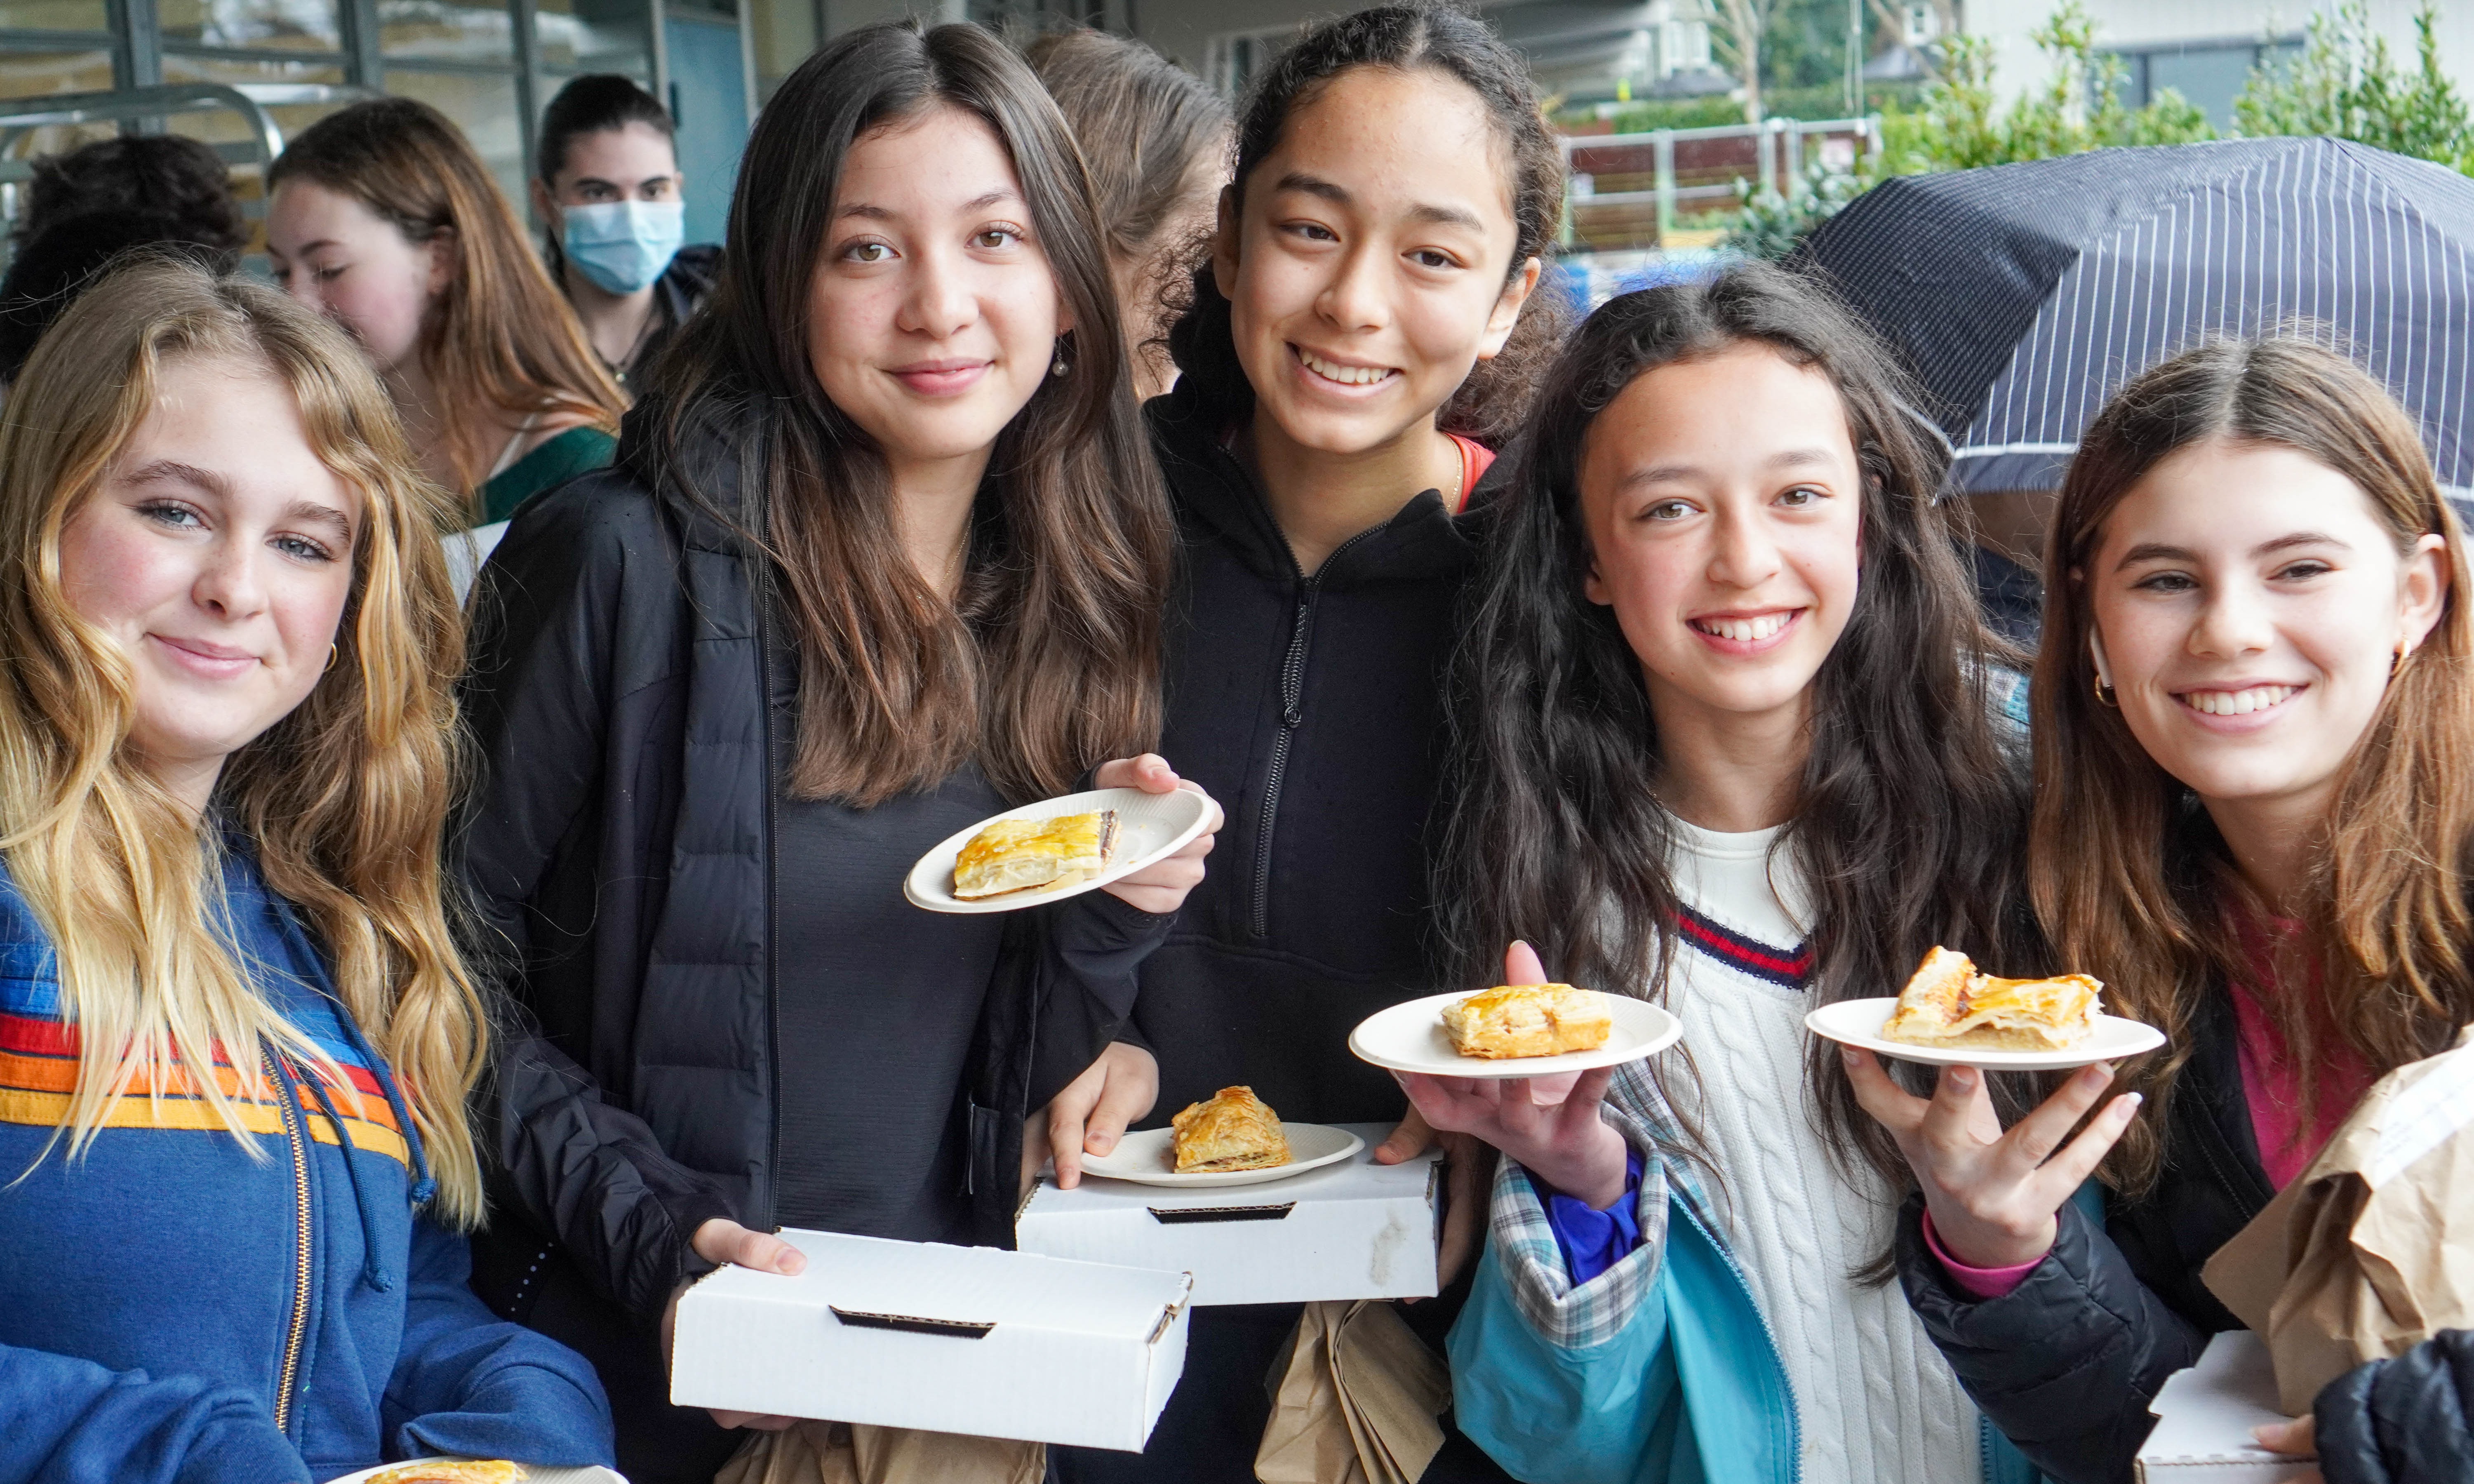 Five upper school girls showing off their galettes for the camera.